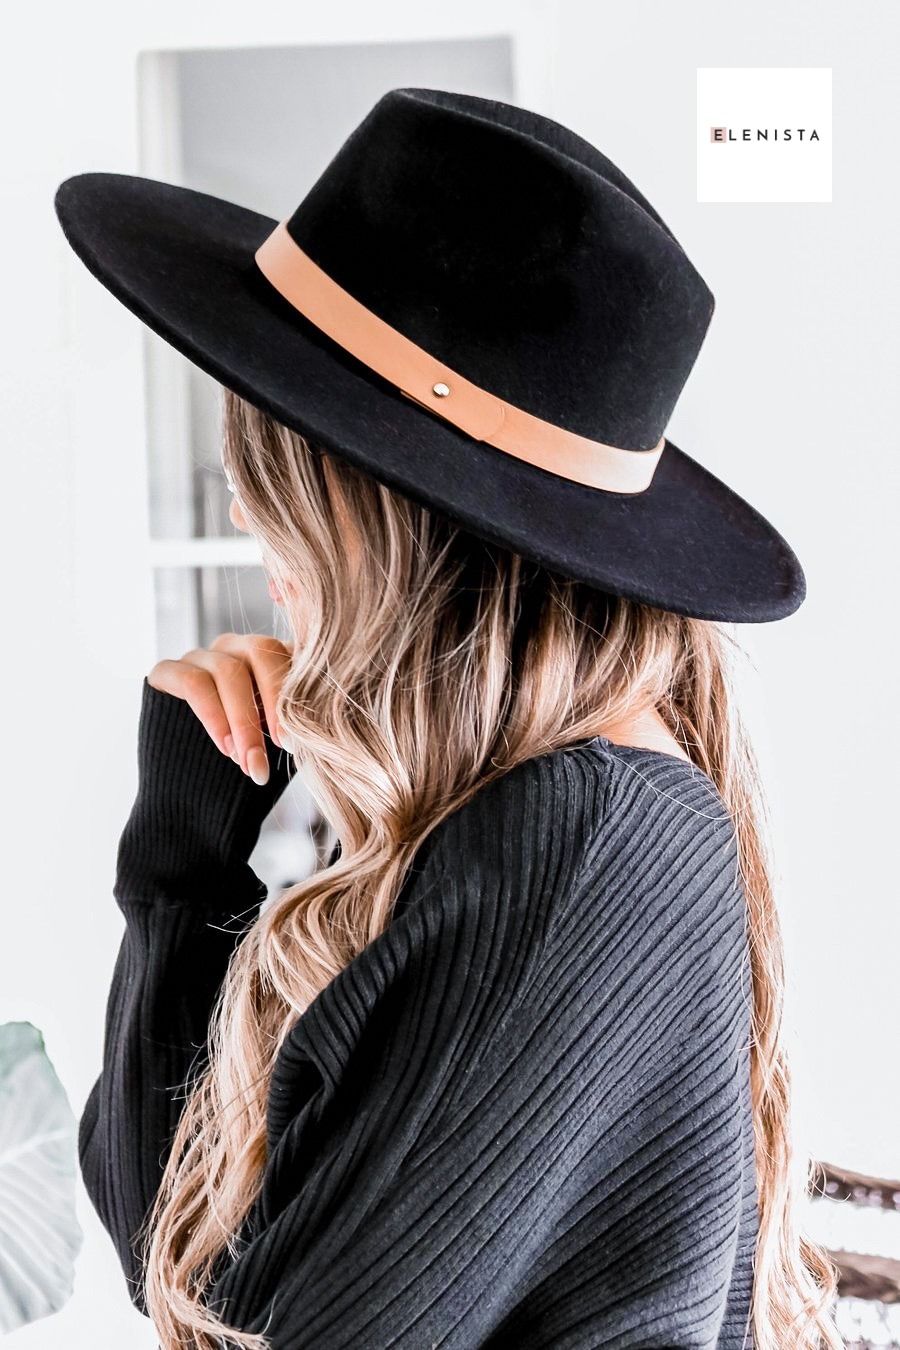 Stylish hats for women to enhance their
beauty